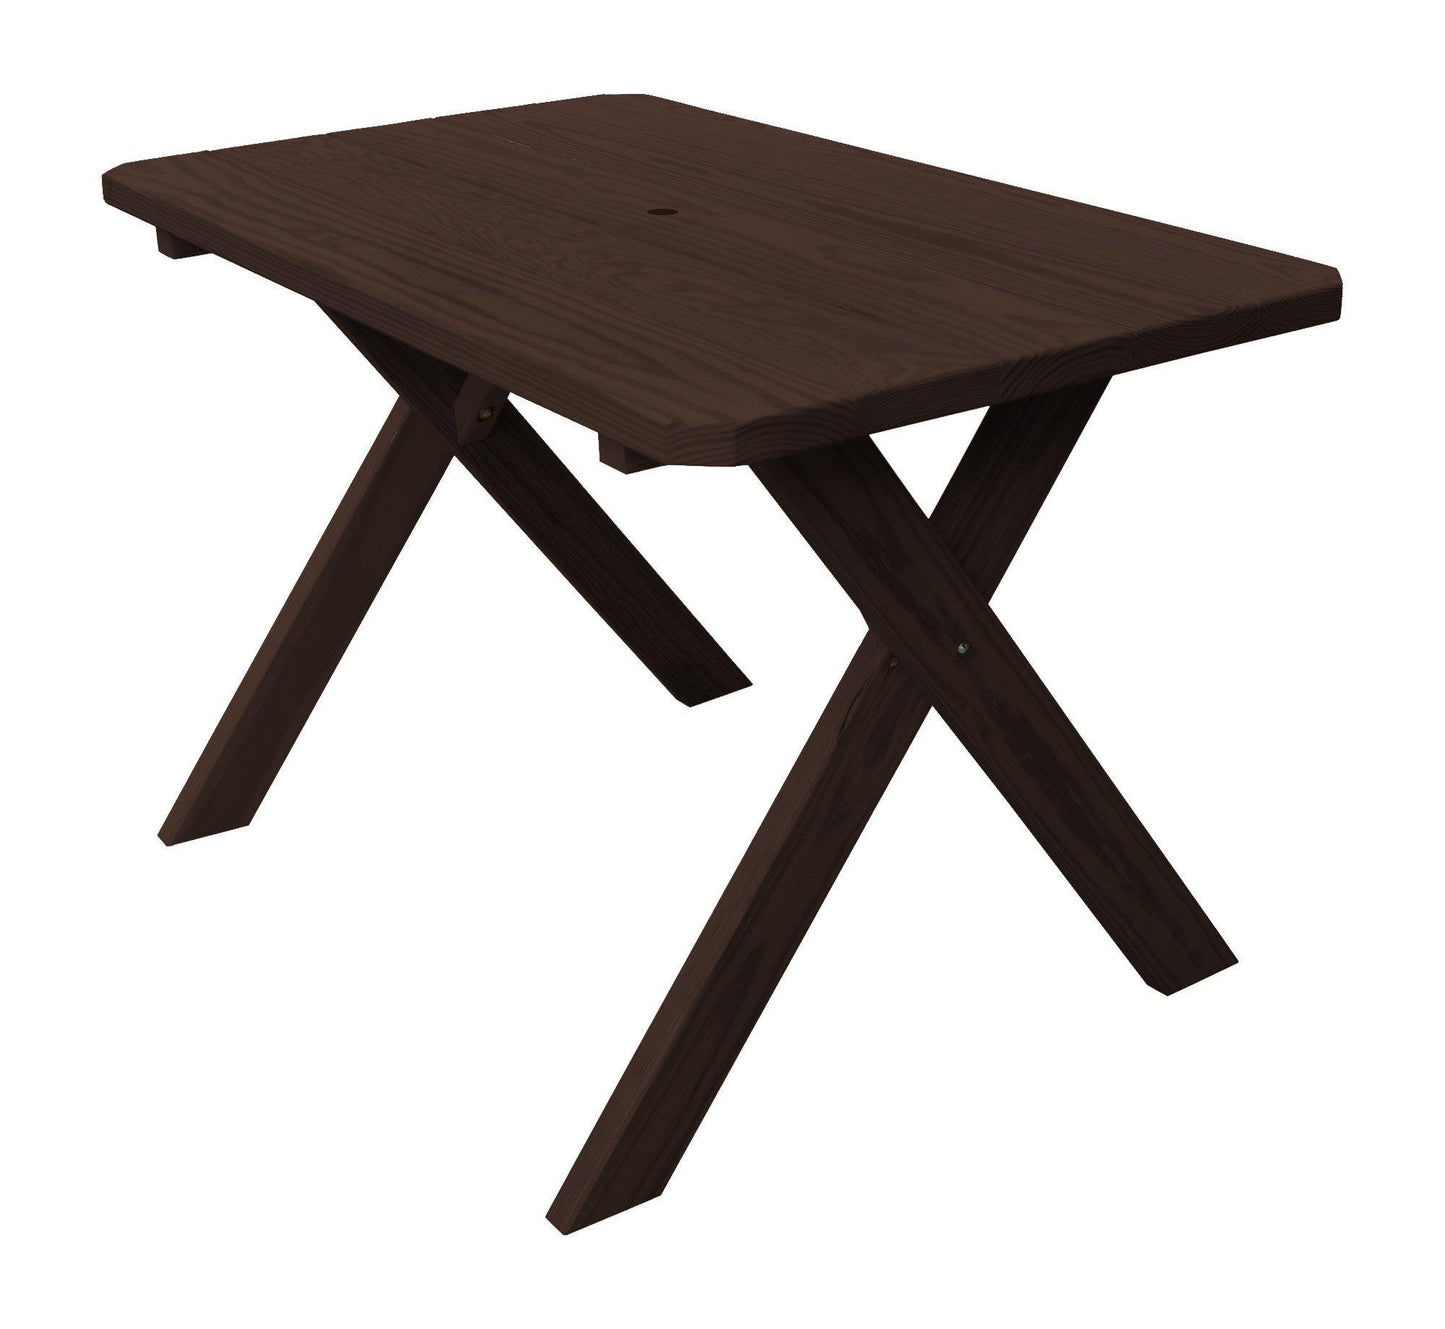 A&L Furniture Co. Yellow Pine 55" Cross-leg Table Only - Specify for Free 2" Umbrella Hole - LEAD TIME TO SHIP 10 BUSINESS DAYS